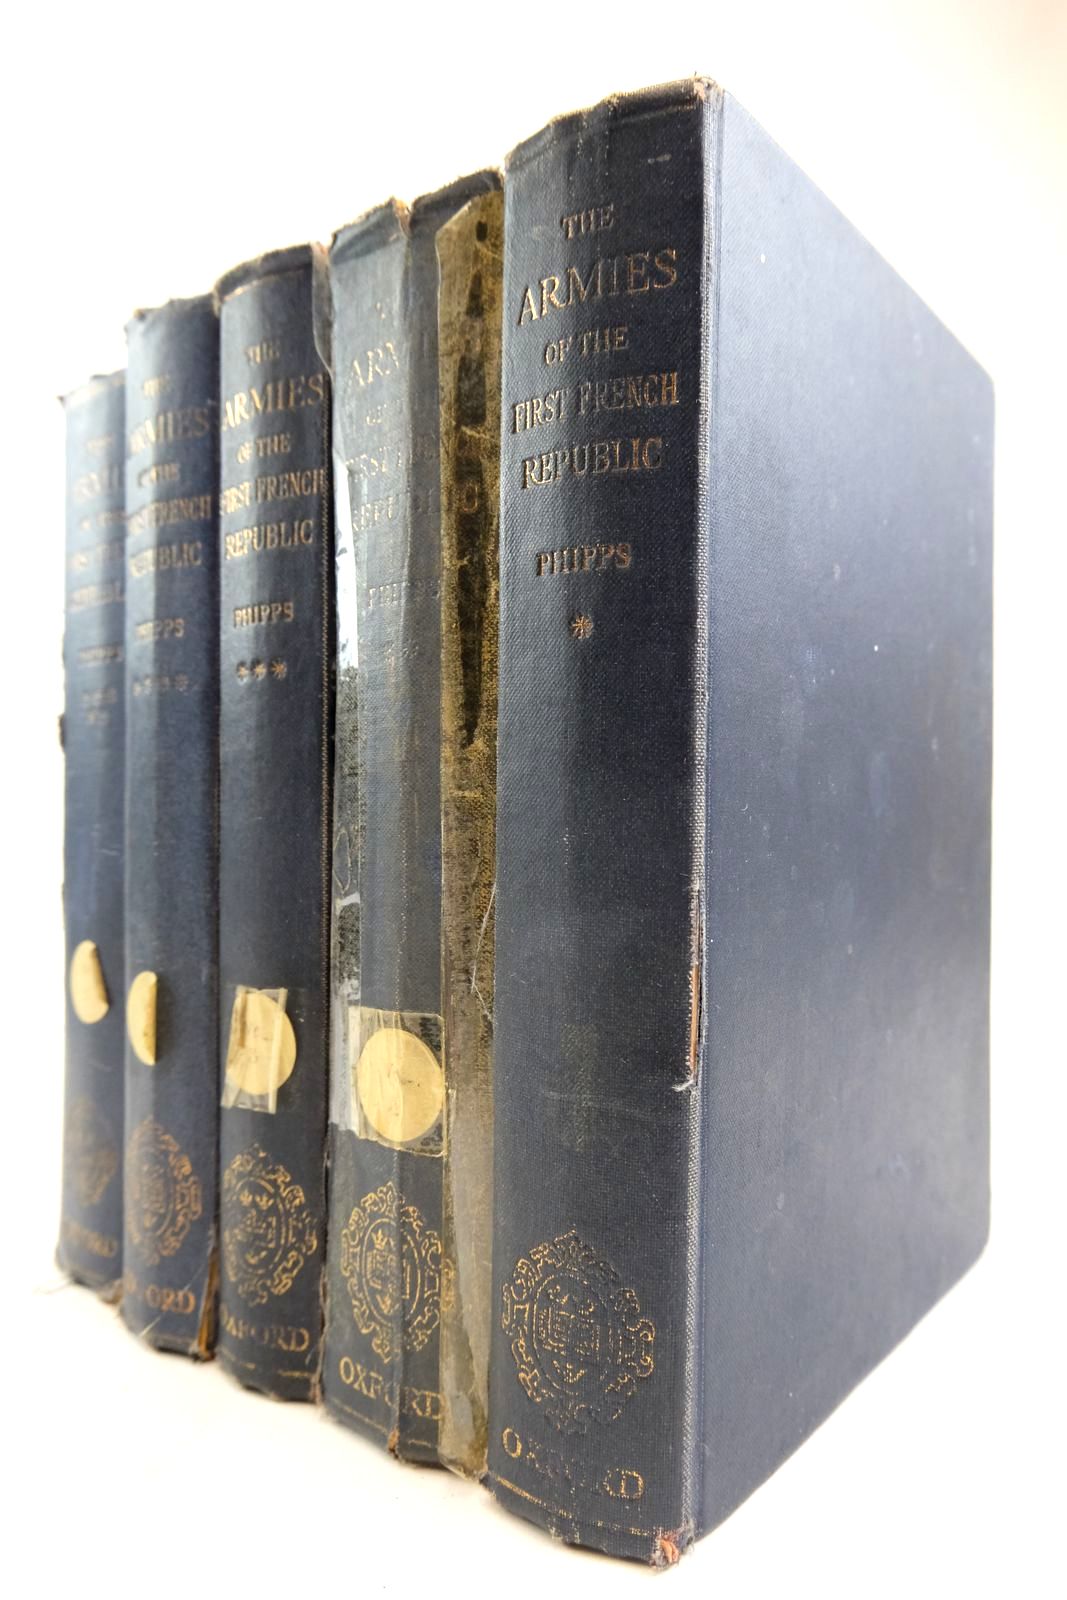 Photo of THE ARMIES OF THE FIRST FRENCH REPUBLIC AND THE RISE OF THE MARSHALS OF NAPOLEON I (5 VOLUMES) written by Phipps, Ramsay Weston published by Oxford at the Clarendon Press (STOCK CODE: 2134137)  for sale by Stella & Rose's Books